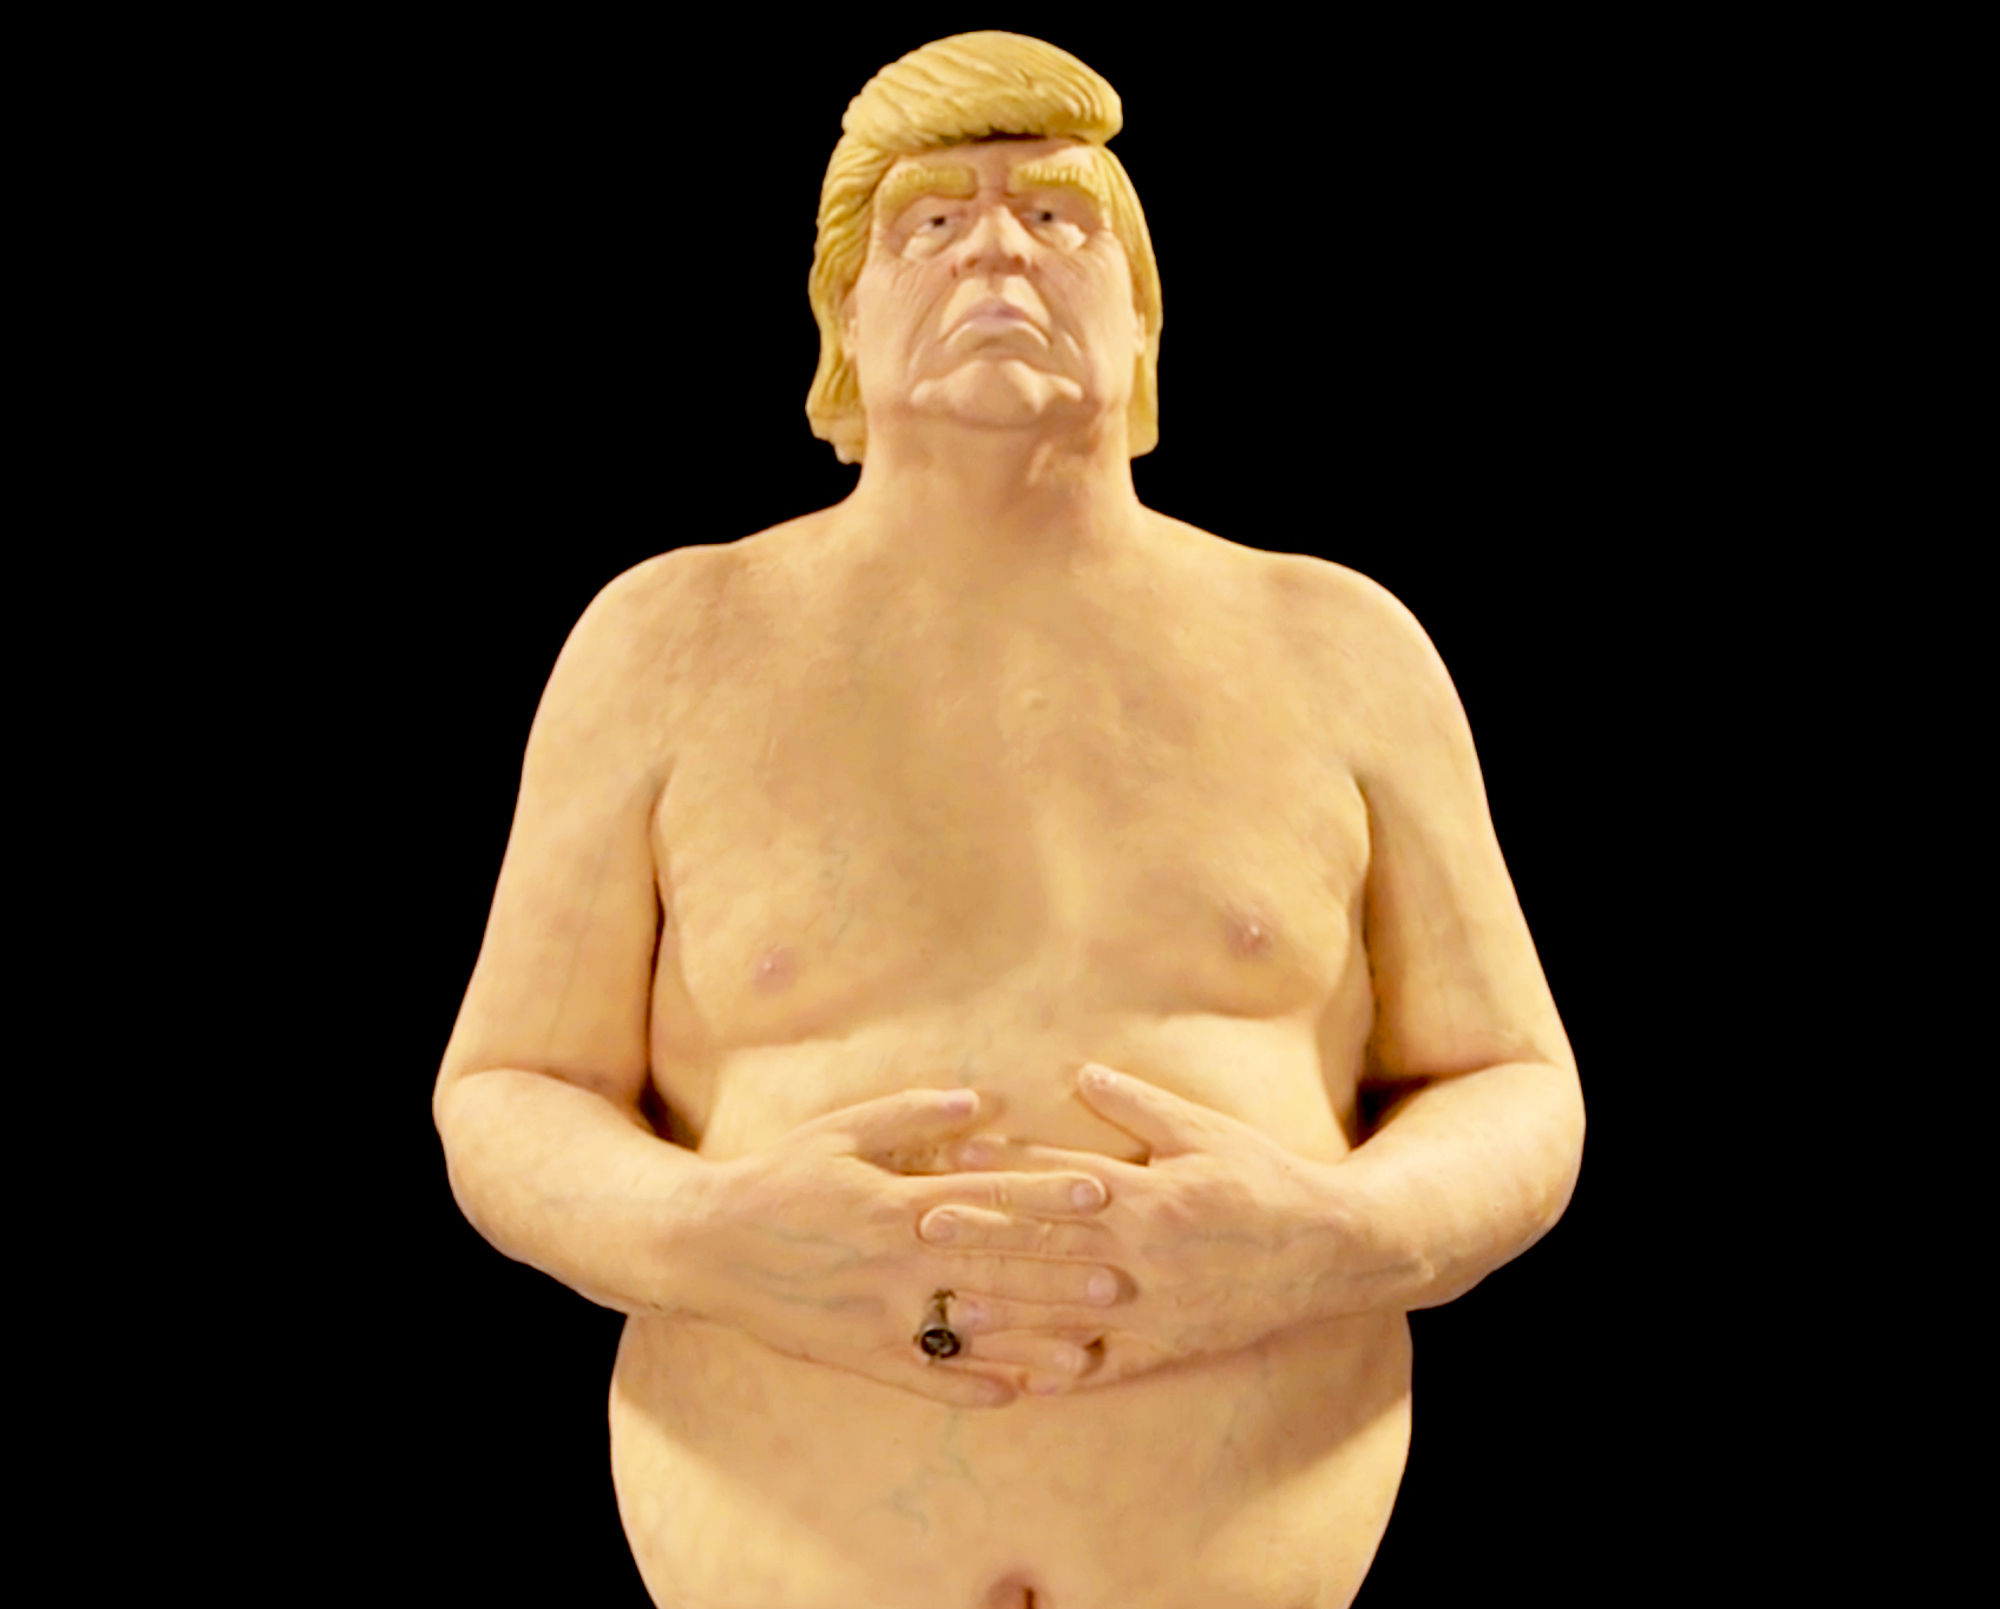 Why Are There Naked Donald Trump Statues All Over the U.S.?